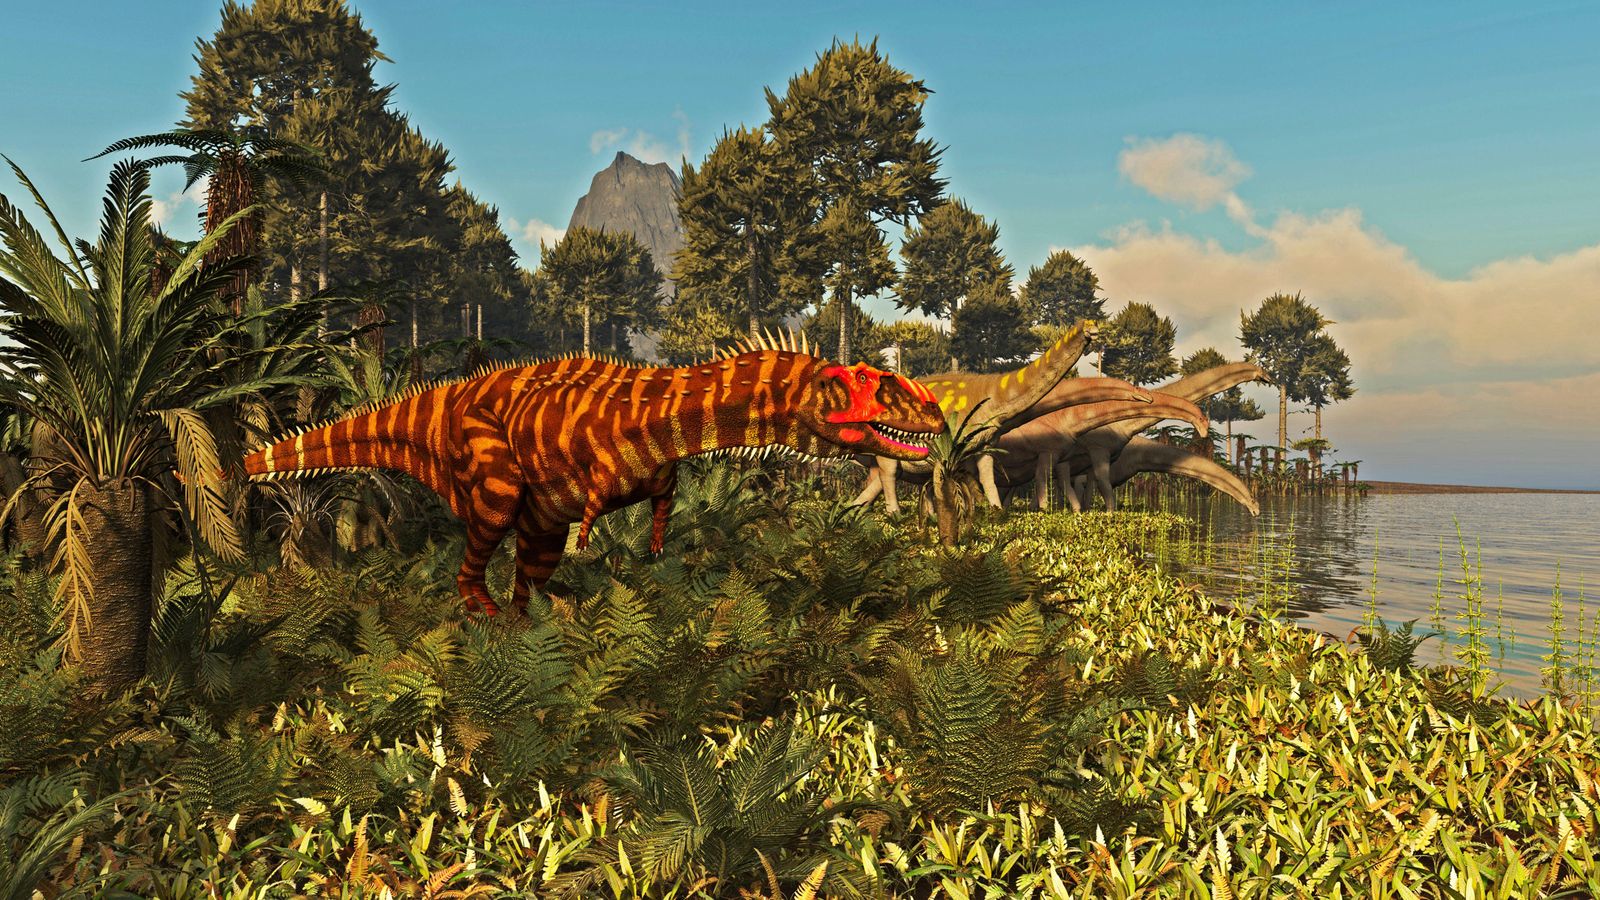 An illustration of what a Rajasaurus might have looked like (Credit: Alamy)